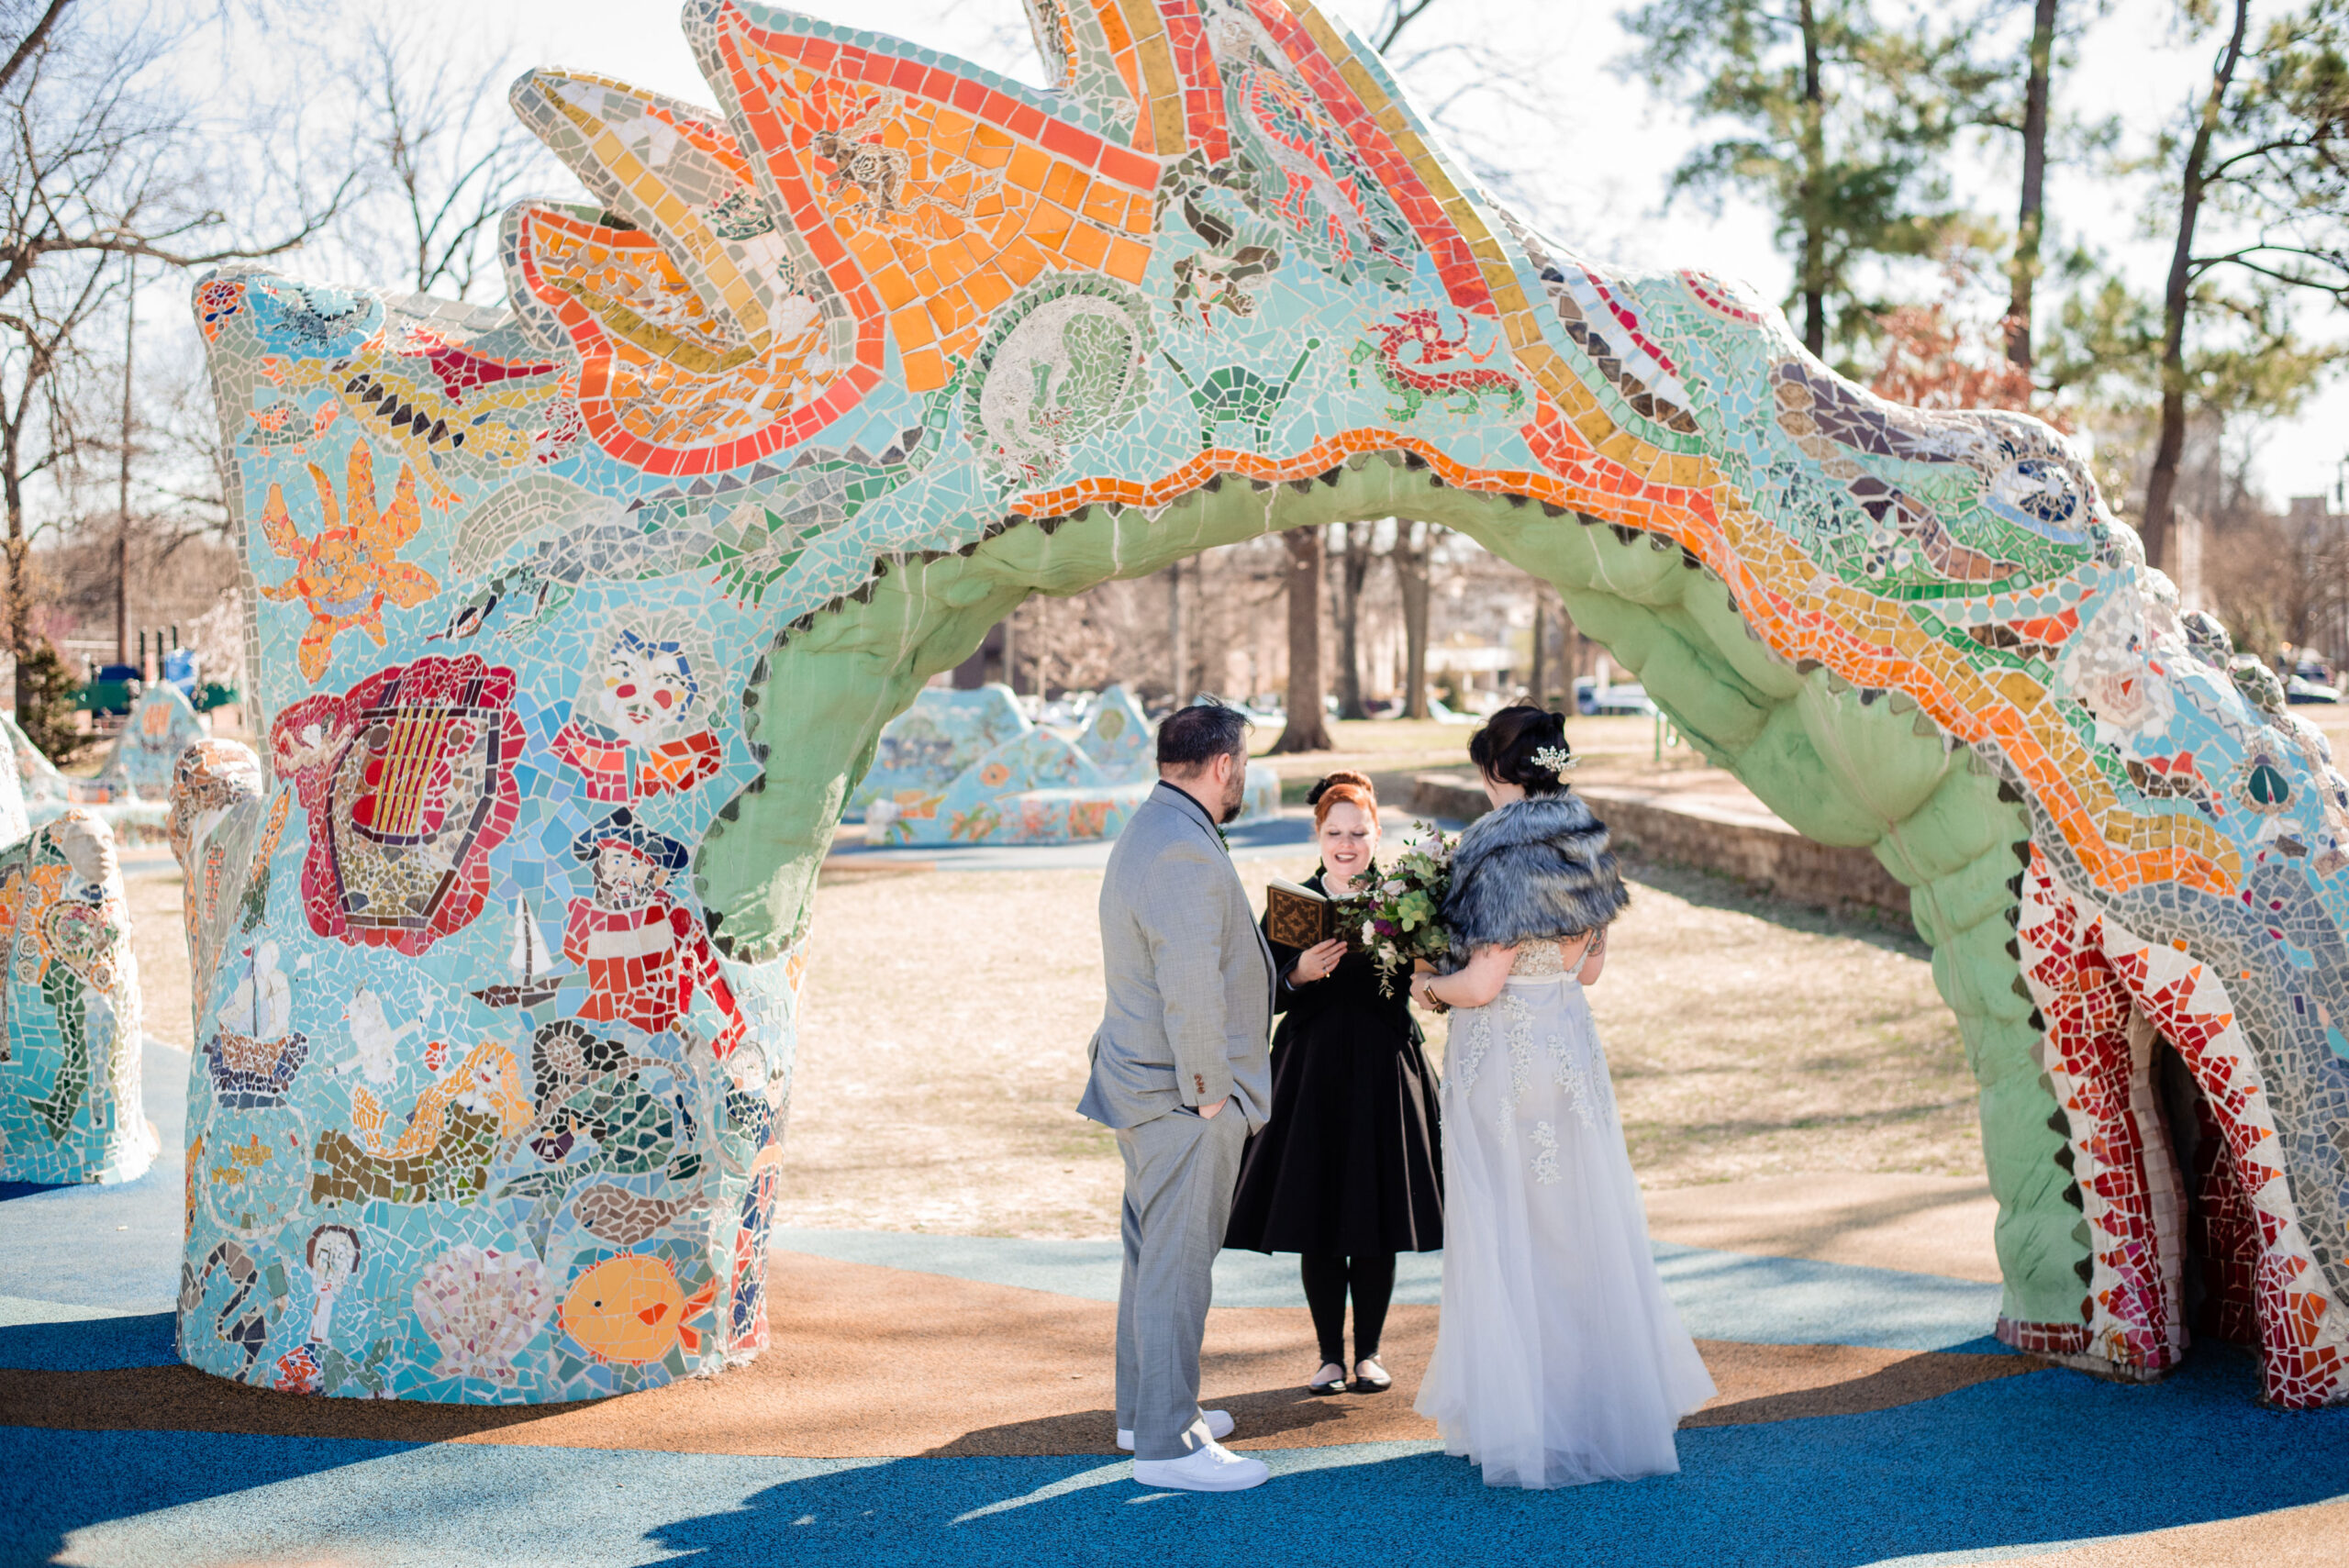 The bride, wearing a lace silver dress, and gray fur wrap holds a large bouquet as she faces the officiant. The groom, wearing a gray suit with a black shirt, white tie and white and mauve boutonniere stands with his hands in his pockets facing the officiant. They stand beneath a large mosaic dragon at Dragon Park in Nashville. The officiant, standing beneath the dragon arbor is wearing a black dress with a black flower in her hair. She holds a leather bound book with gold detailing on the front. 